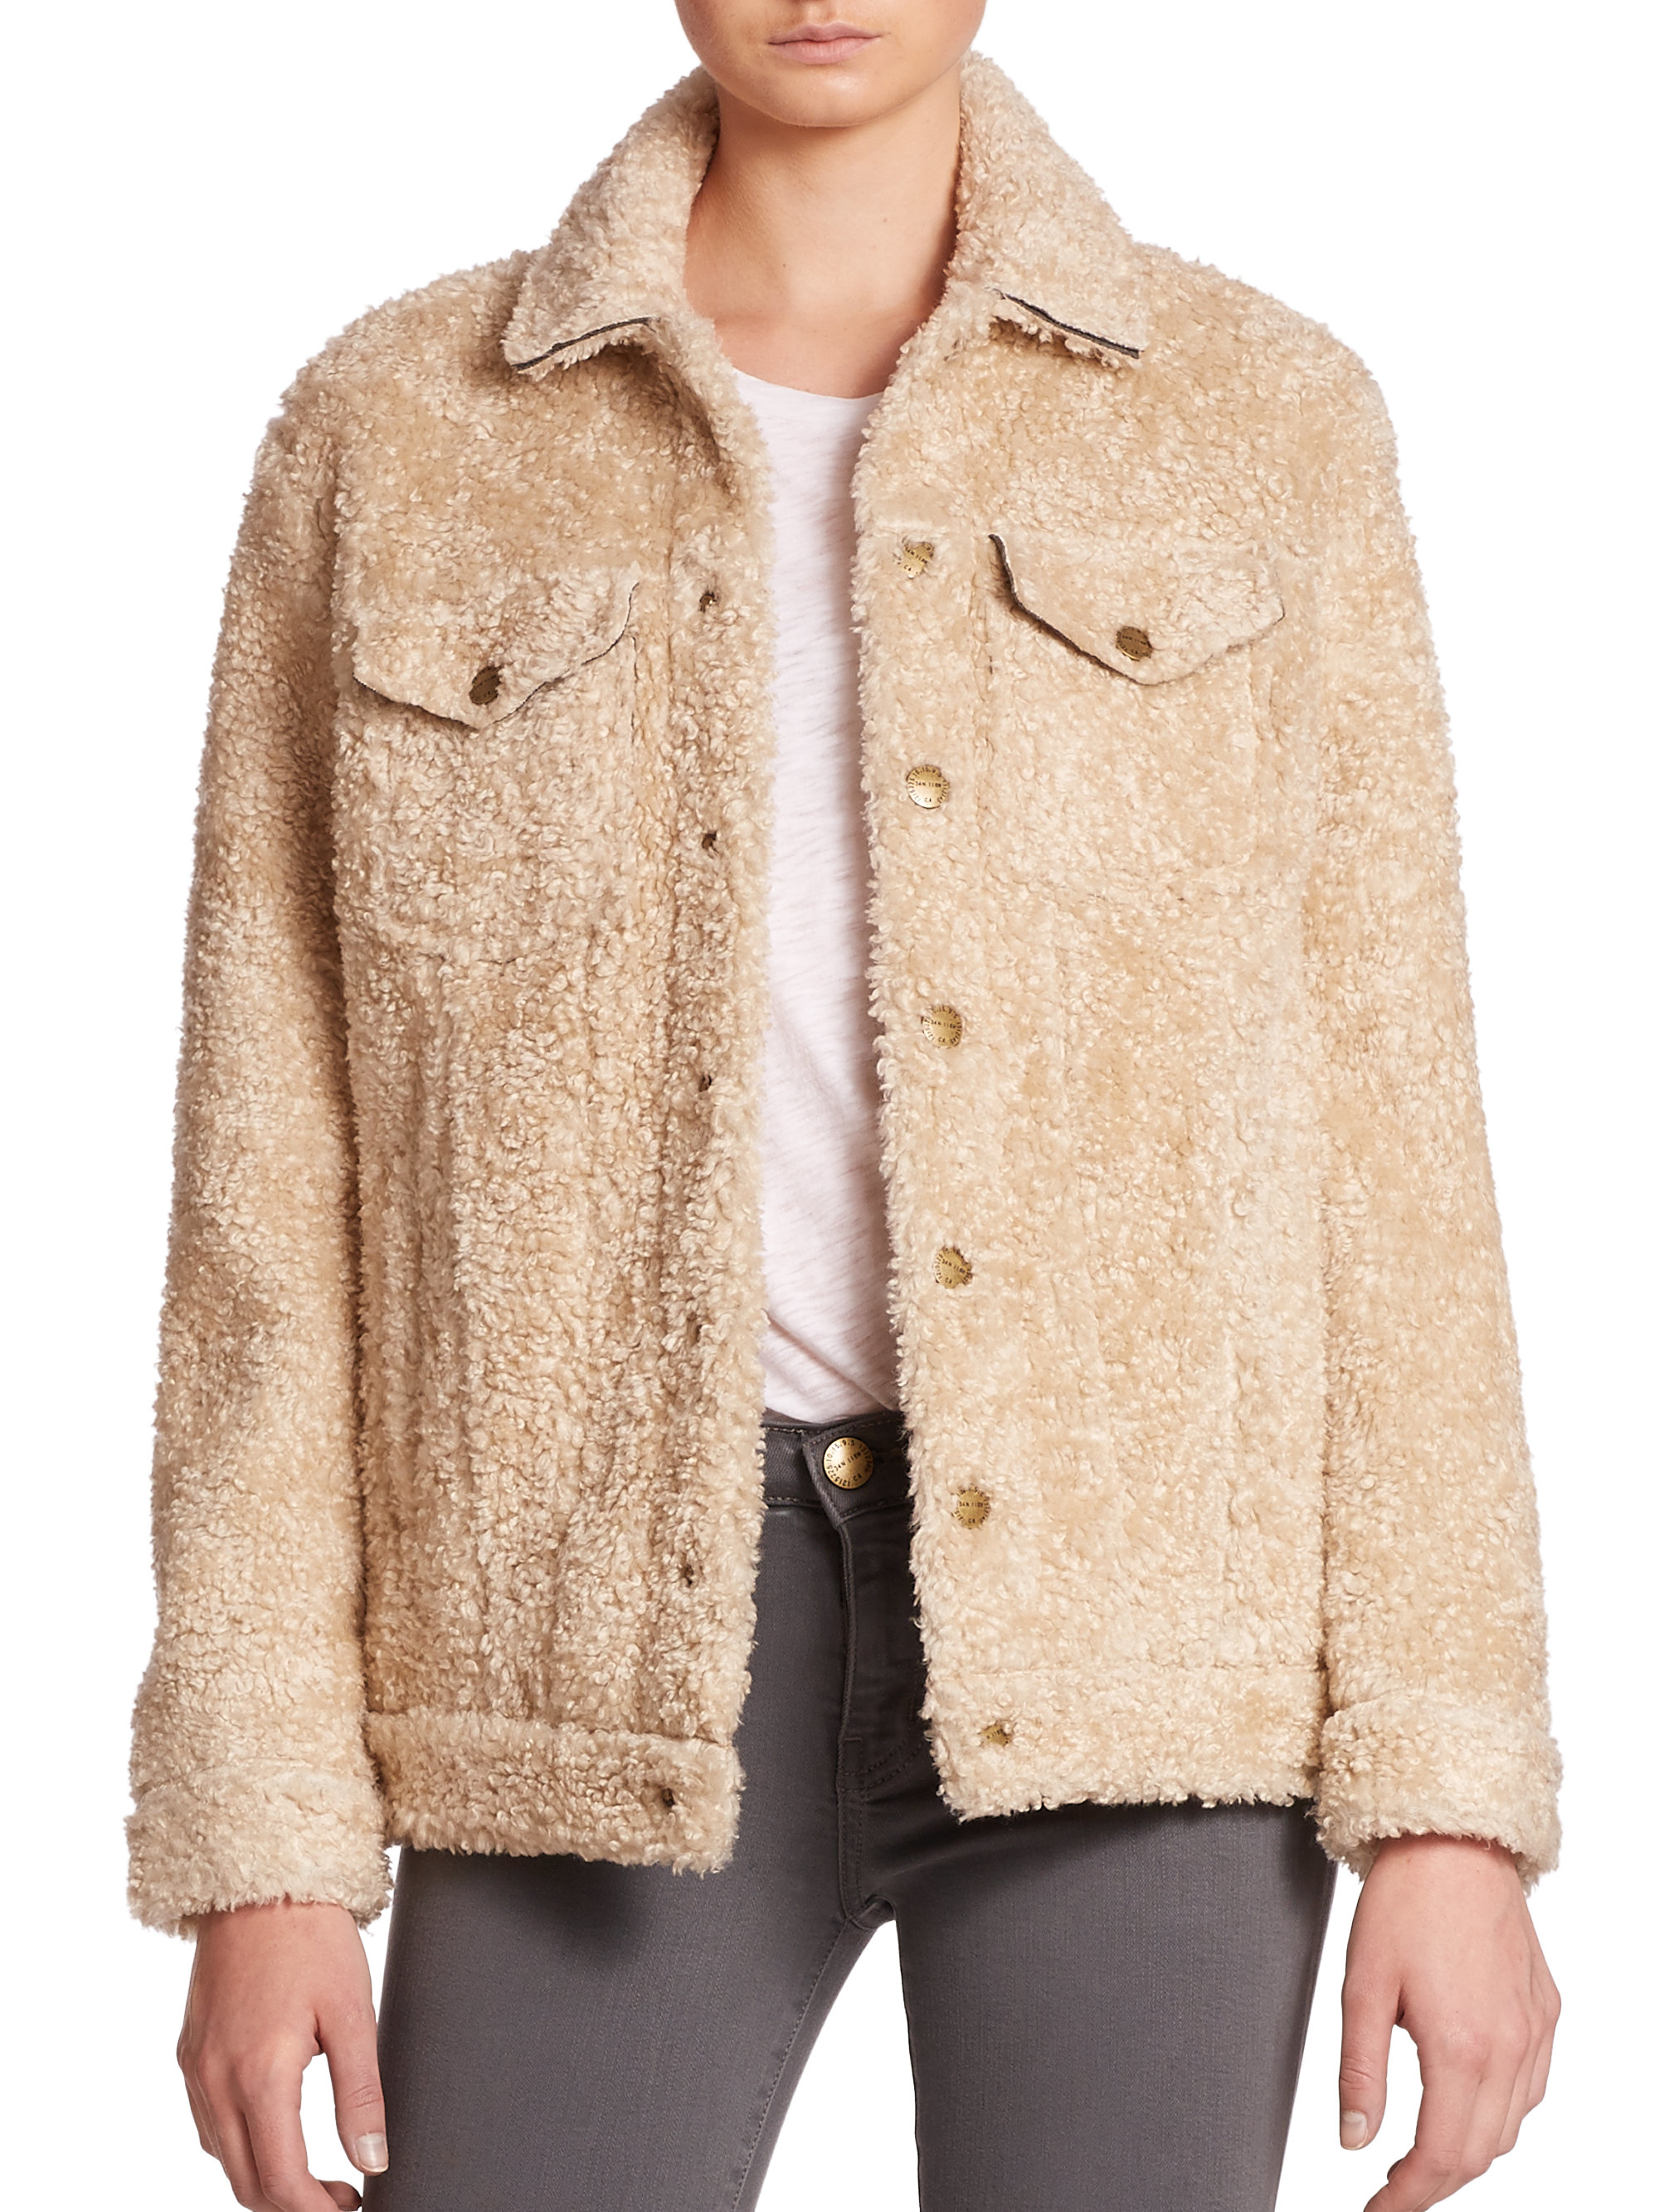 Lyst - Current/Elliott Teddy Faux Shearling Jacket in Natural